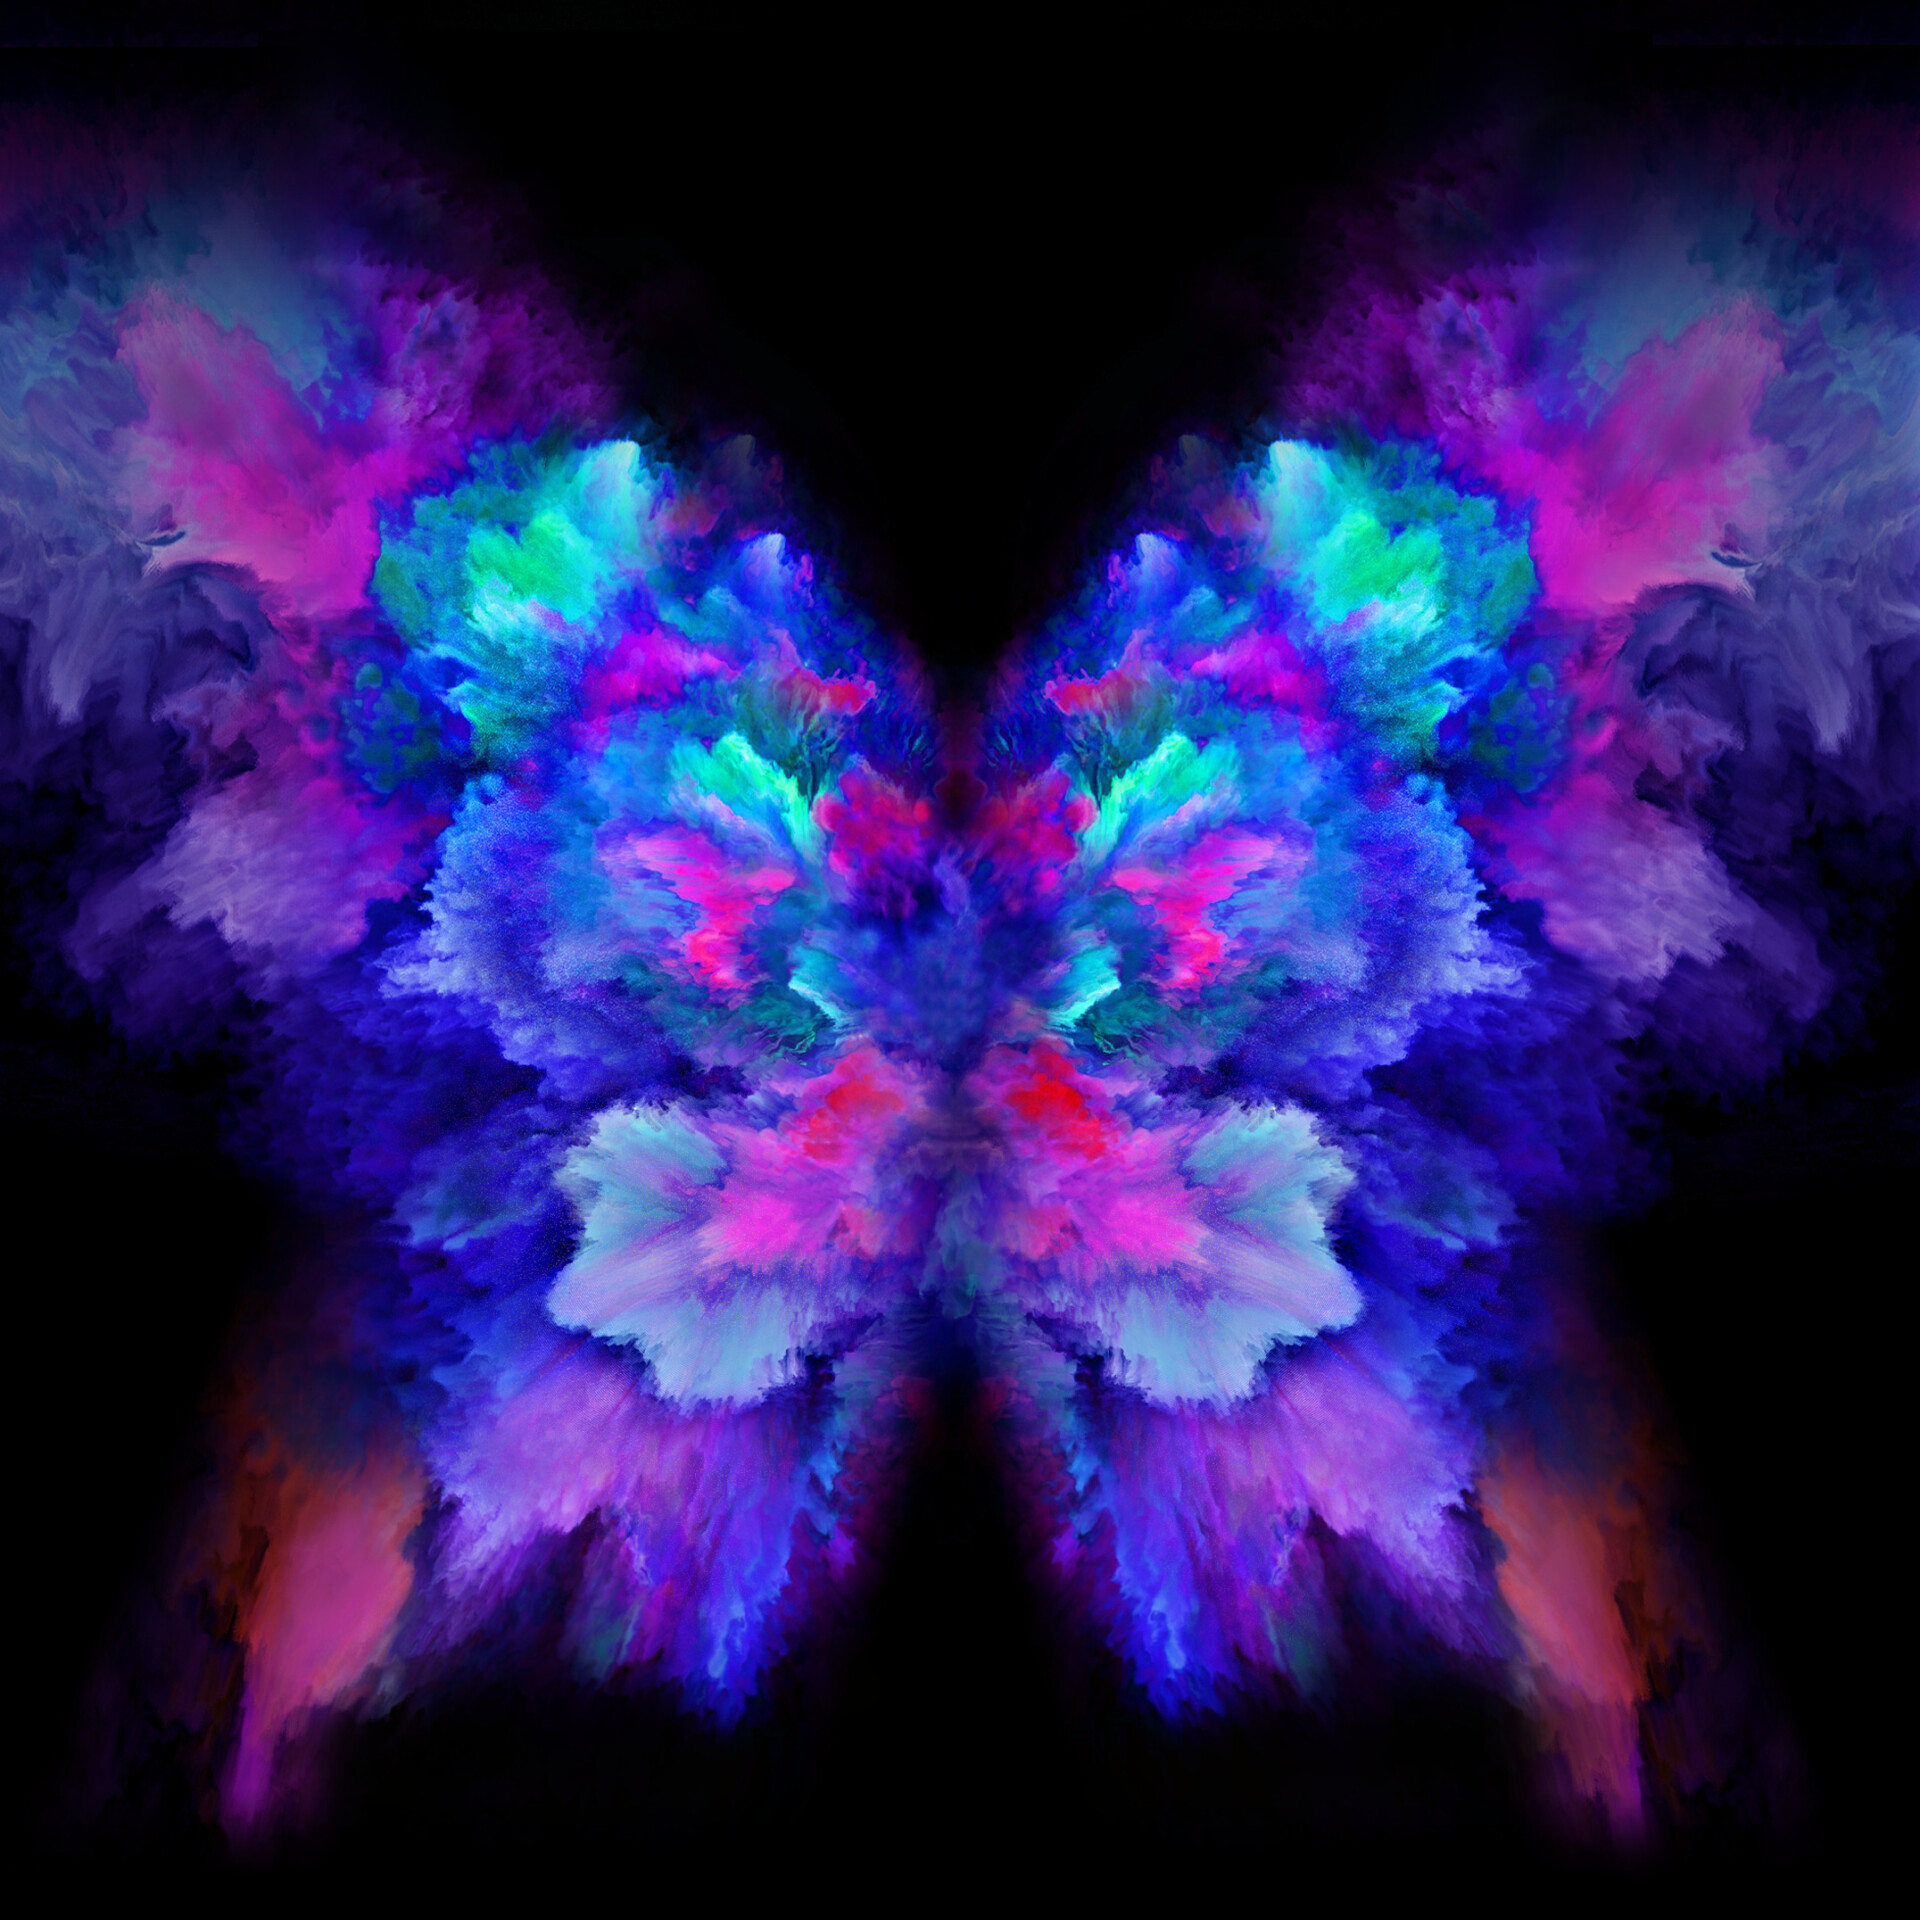 Samsung Galaxy Fold Butterfly Exploded Wallpaper